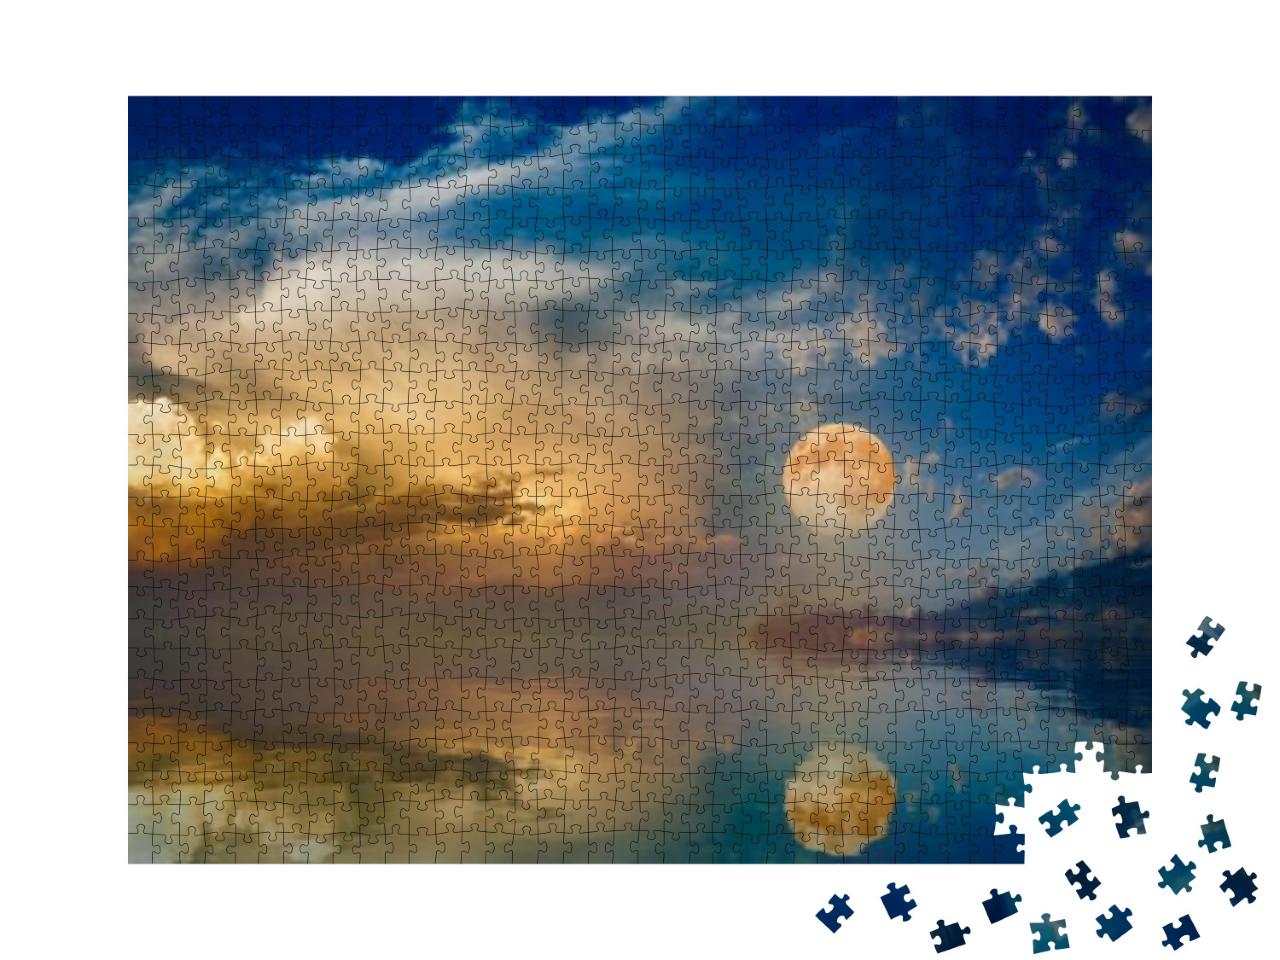 Full Moon Rising Above Serene Sea in Sunset Sky. Elements... Jigsaw Puzzle with 1000 pieces